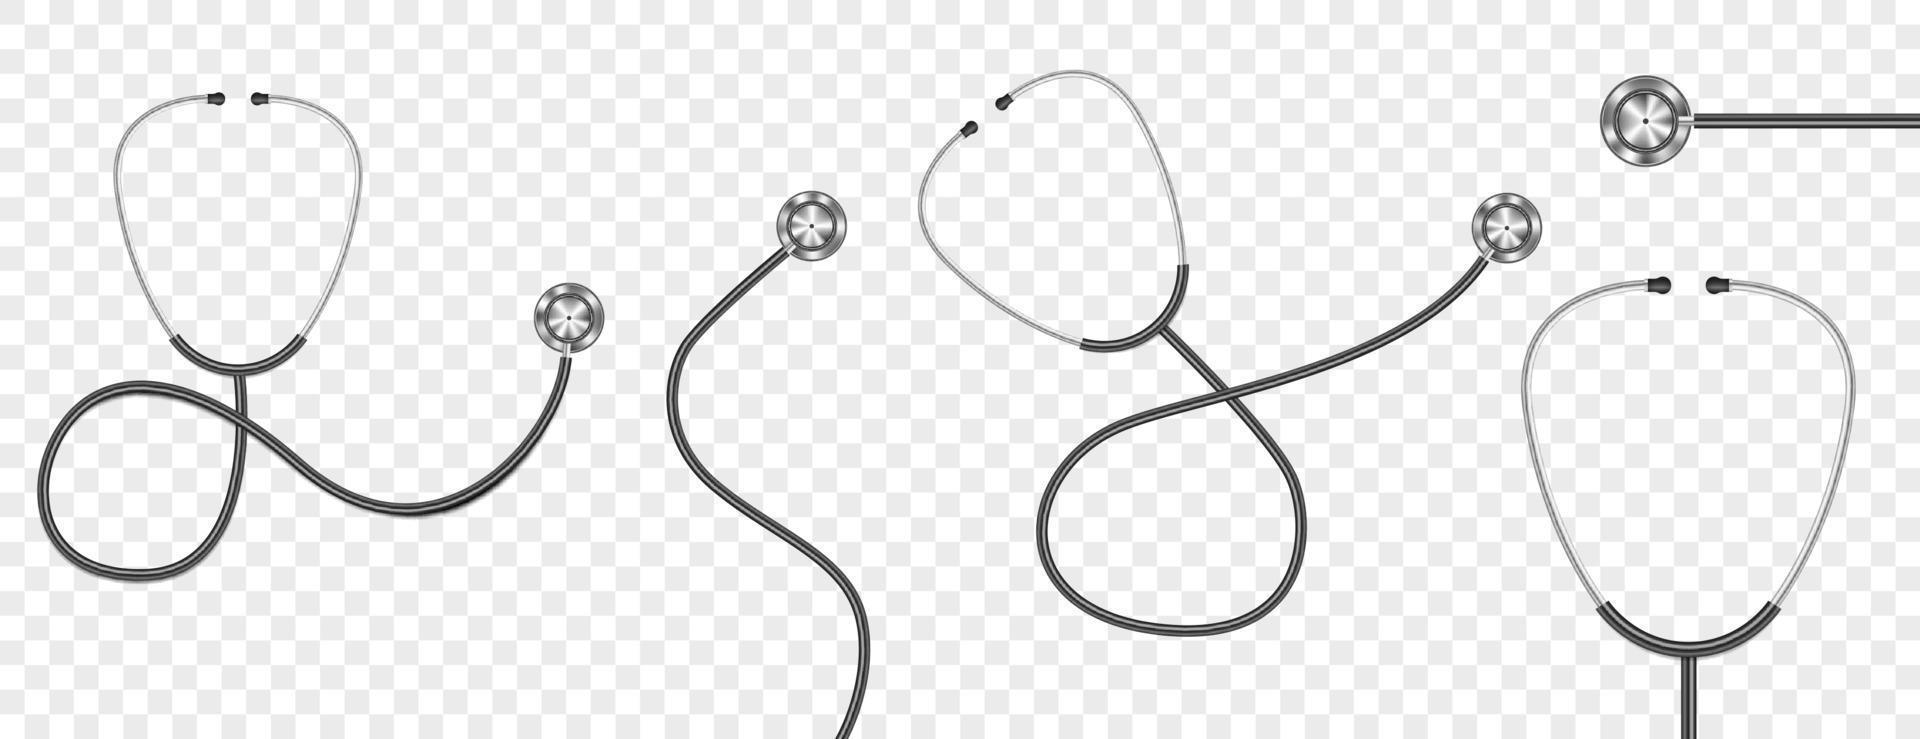 Realistic stethoscope isolated vector